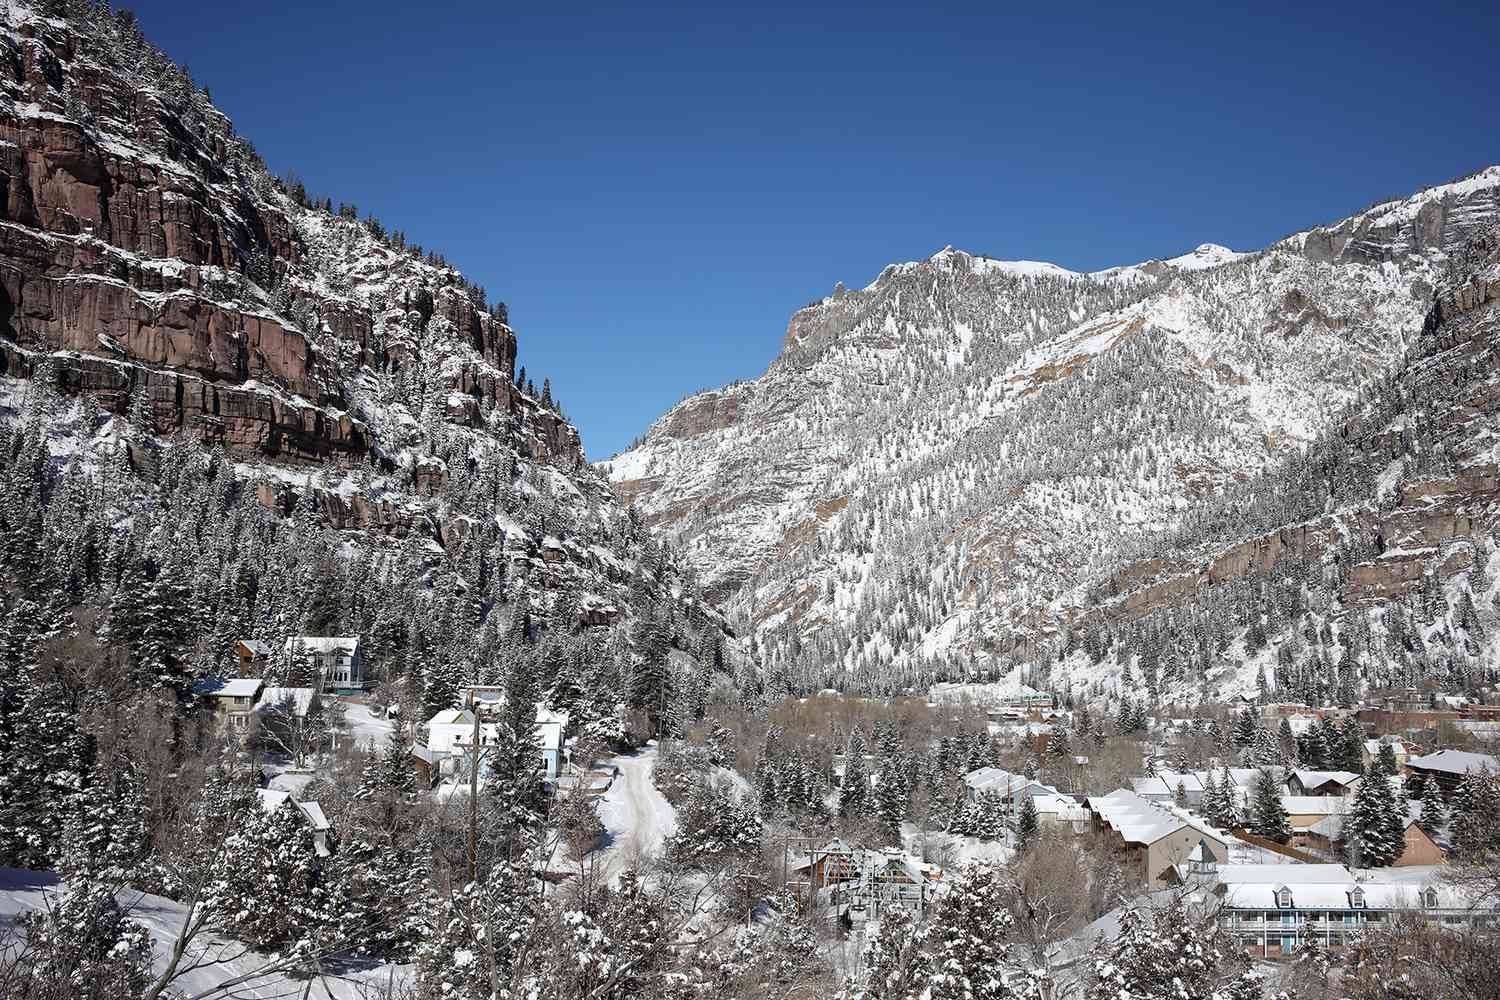 Ouray, Colorado, Is Known as the 'Little Switzerland of America' for Its Skiing and Natural Beauty